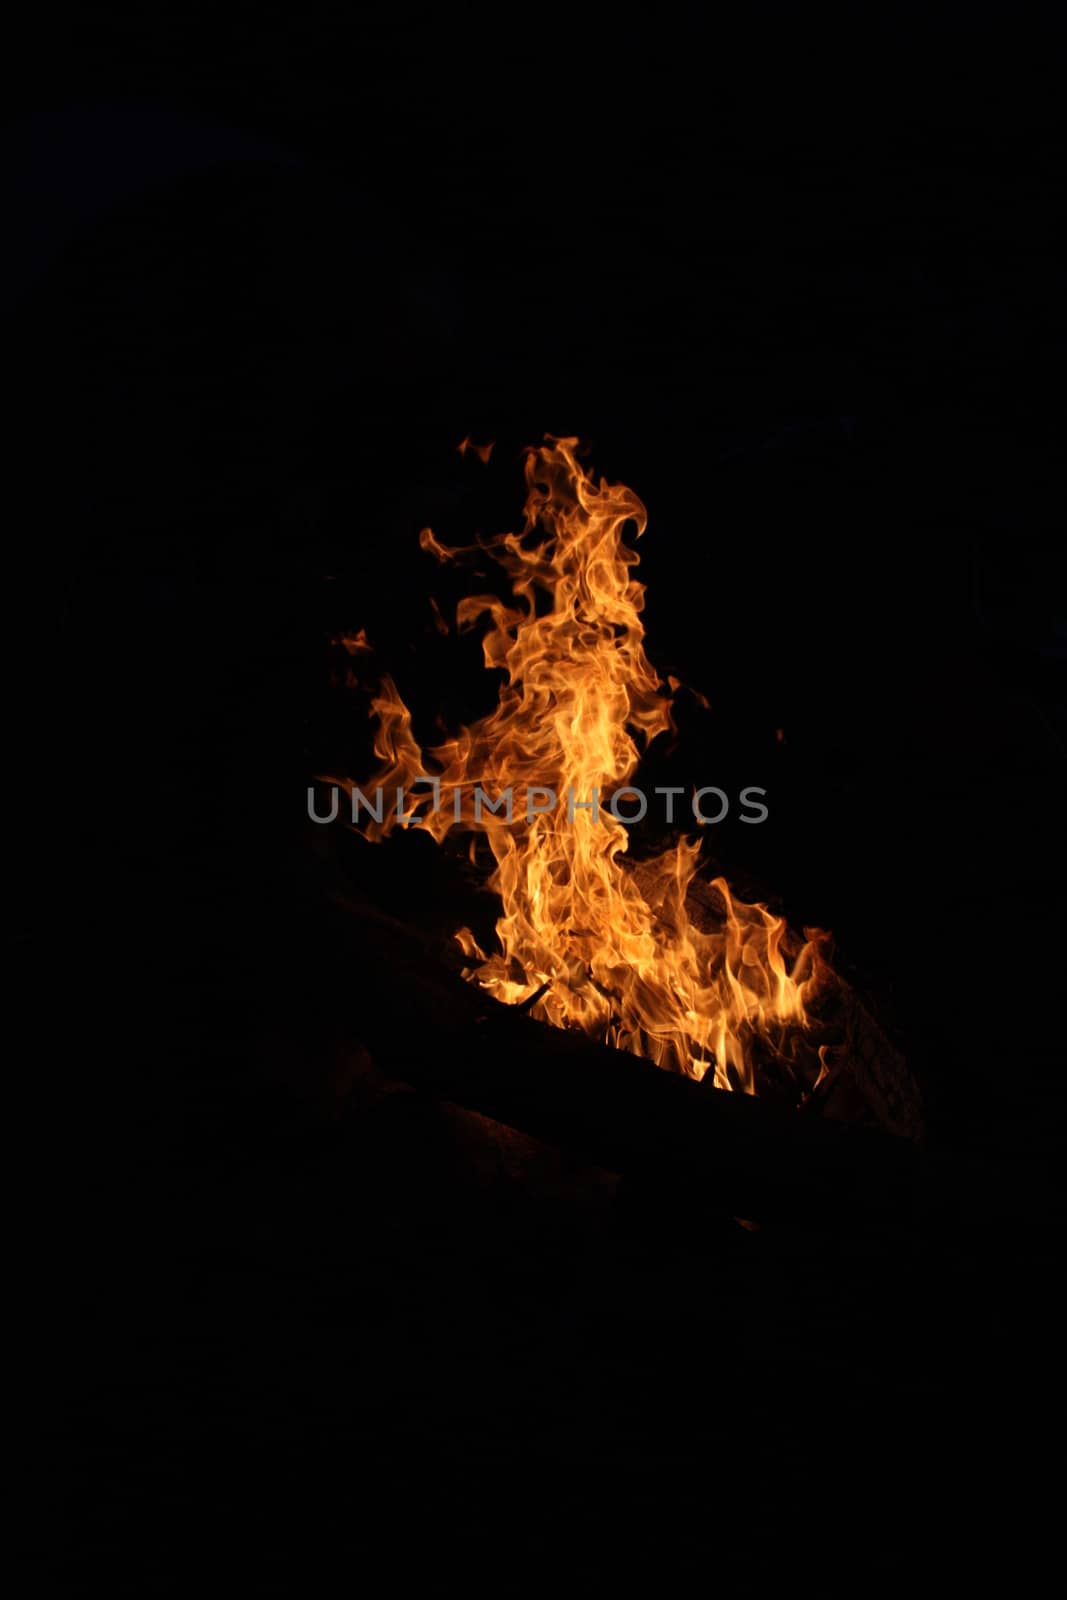 fire at night, orange flames on a black background by chrisga